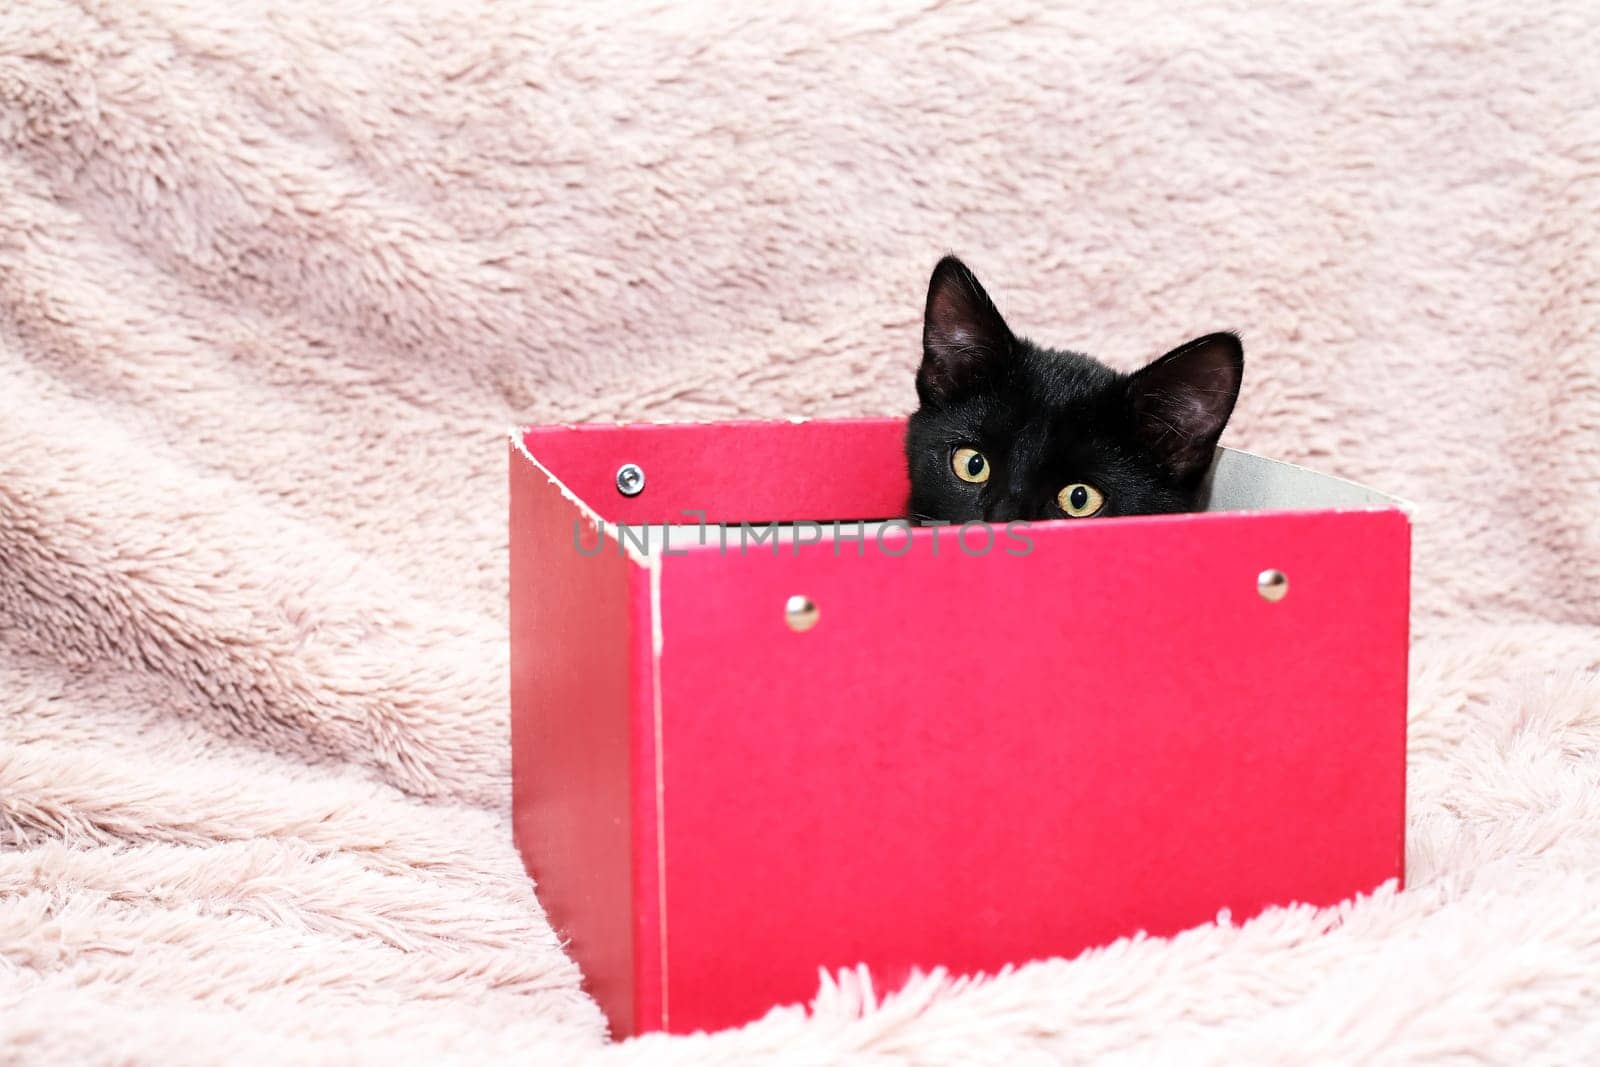 Small black kitten in red cardboard box on fabric background